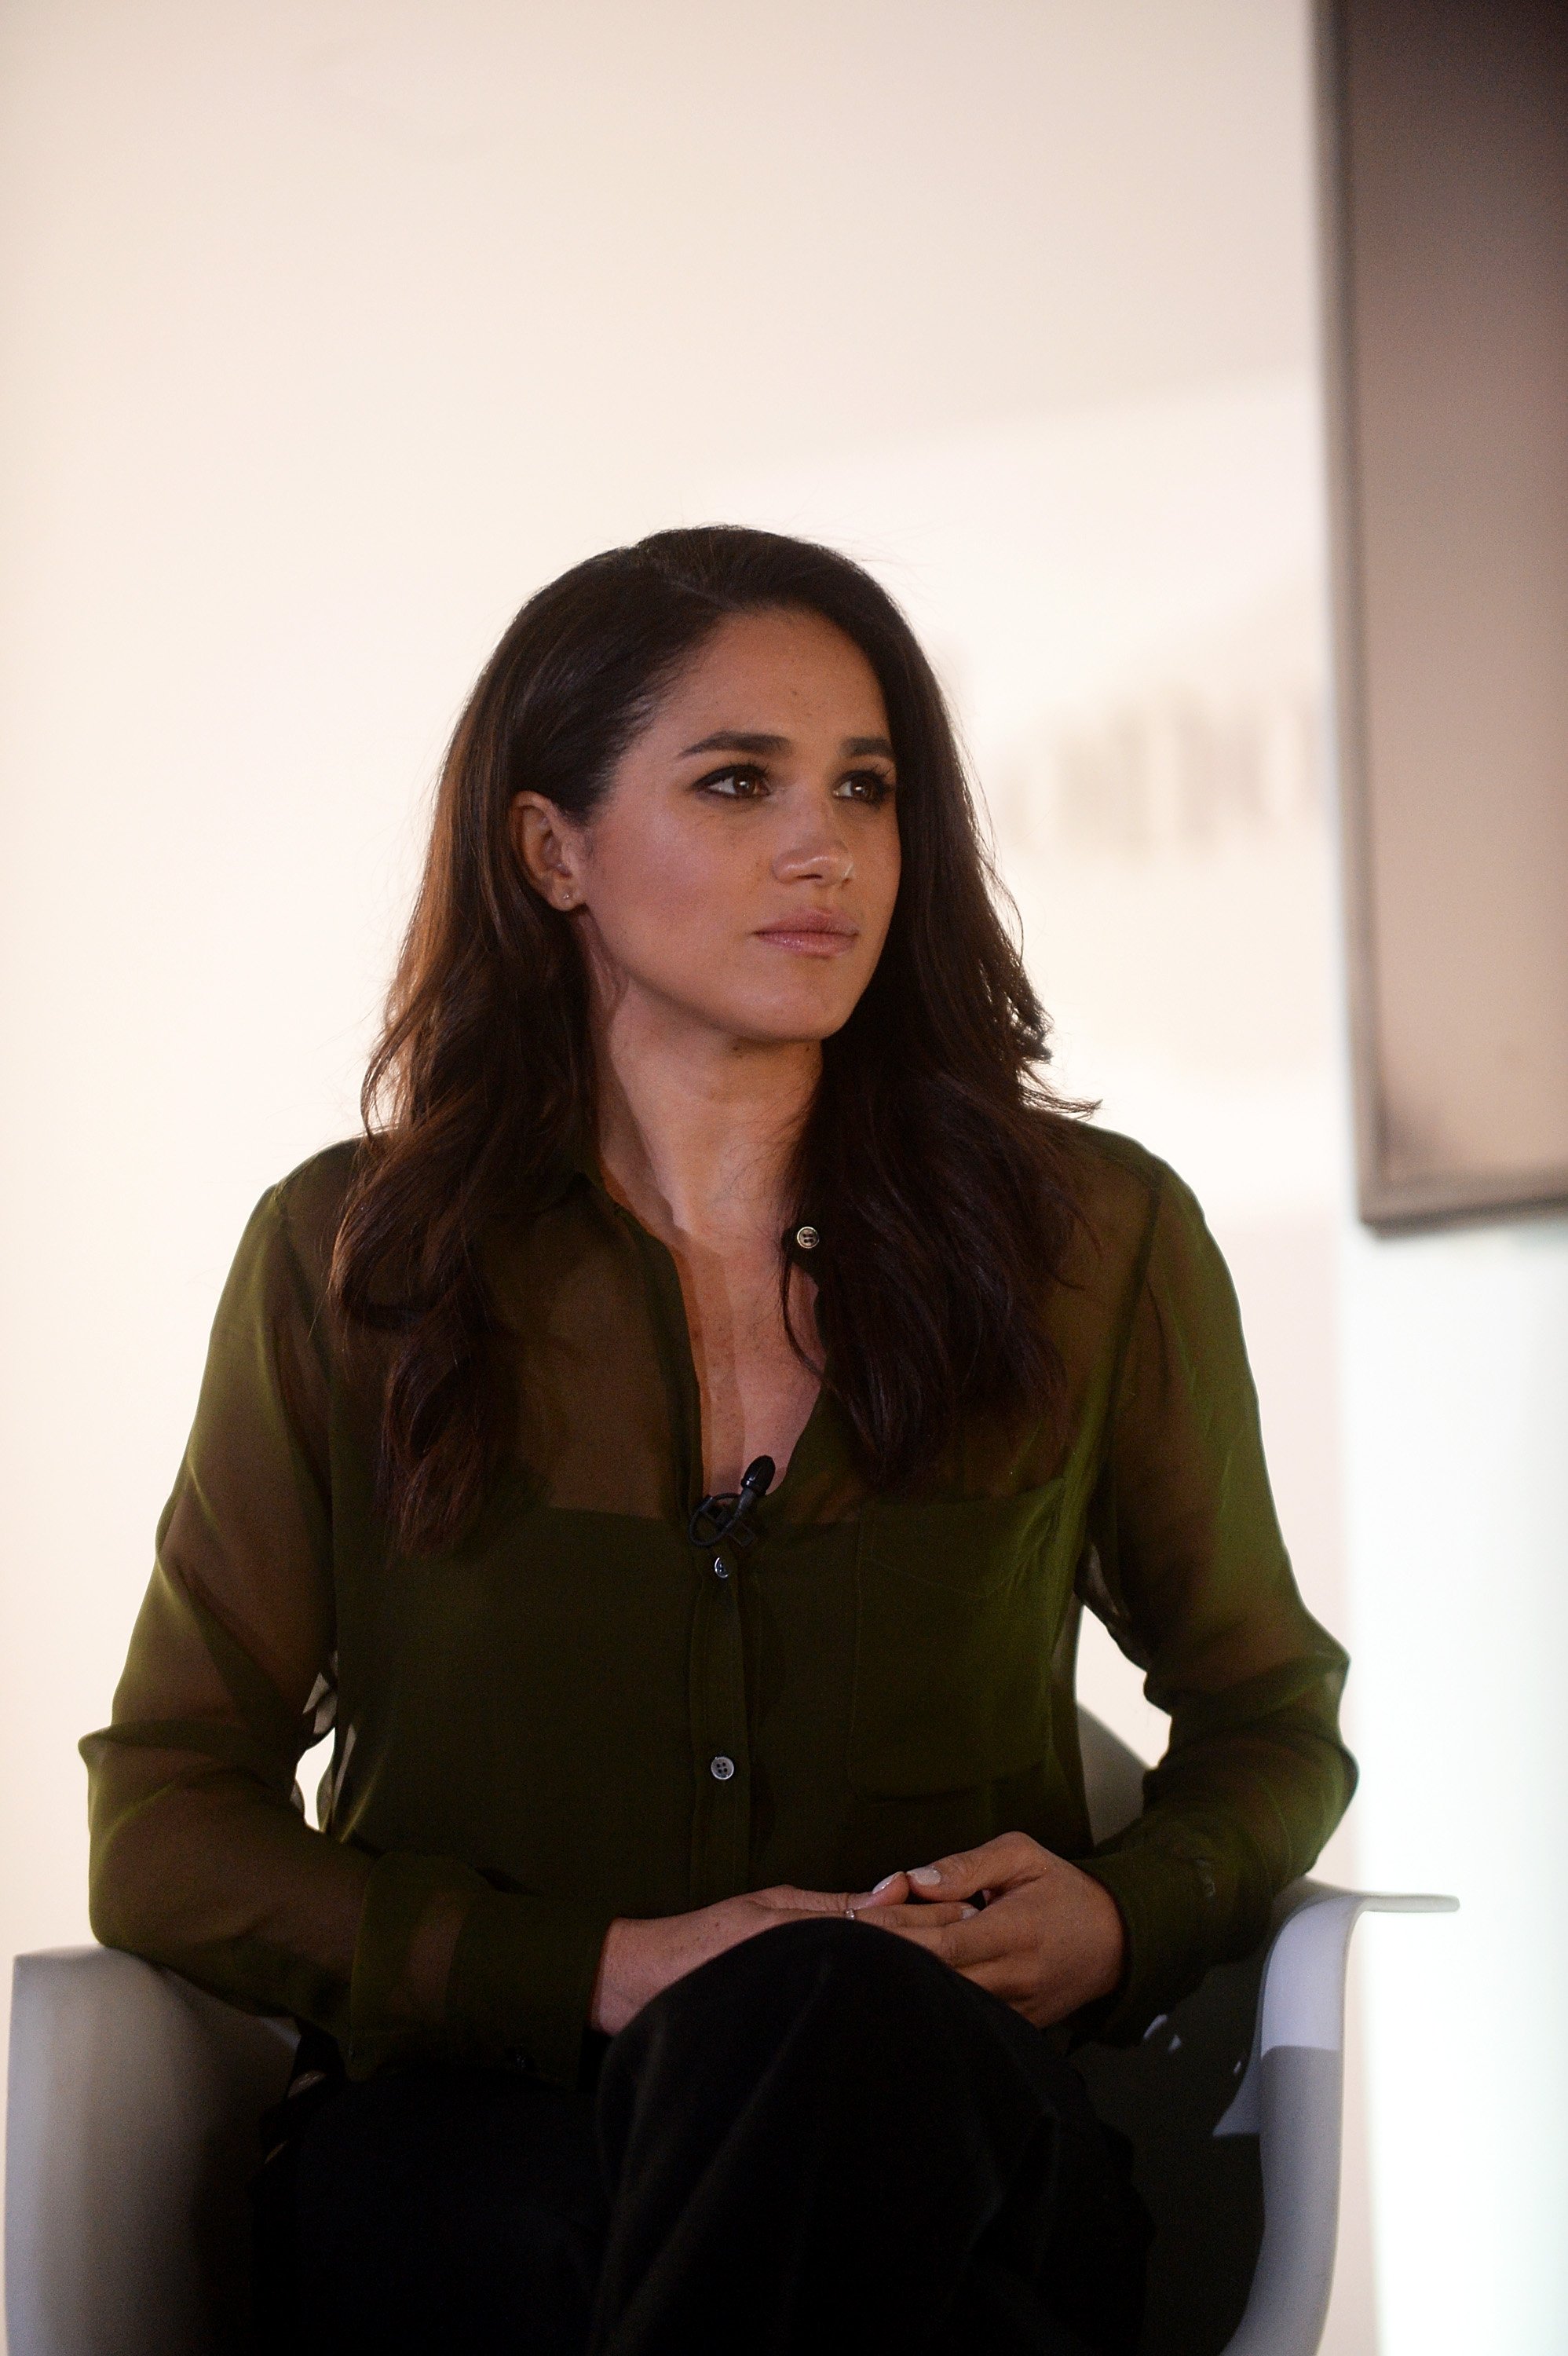 Meghan Markle in Massachusetts 2016. | Source: Getty Images